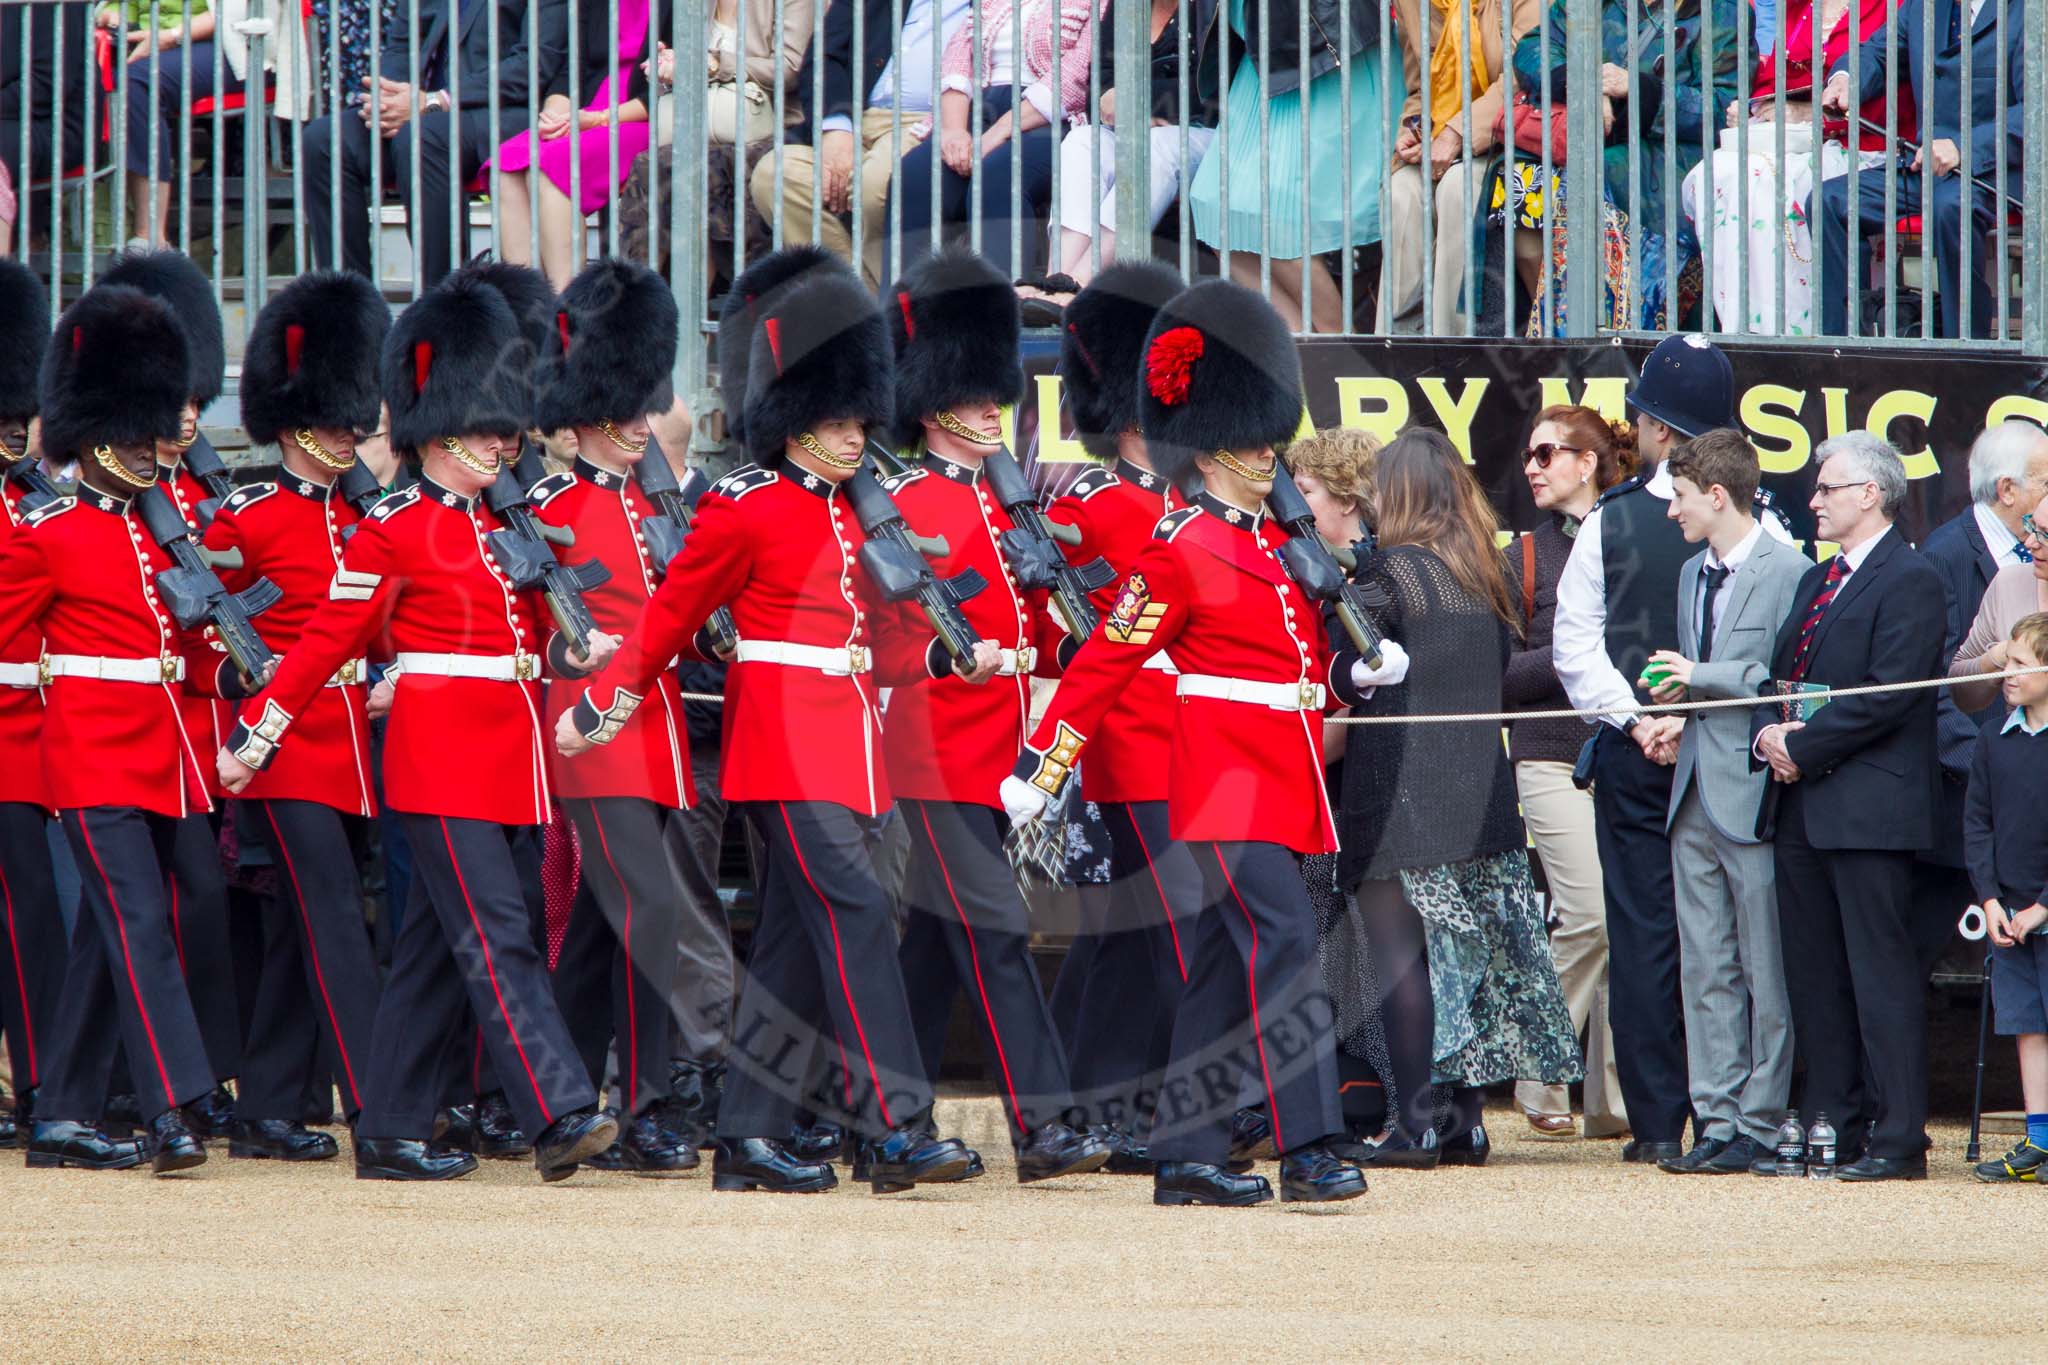 The Colonel's Review 2013: Colour Sergeant T I Pal leading No. 6 Guard, No. 7 Company, Coldstream Guards, along the line of spectators..
Horse Guards Parade, Westminster,
London SW1,

United Kingdom,
on 08 June 2013 at 10:25, image #88